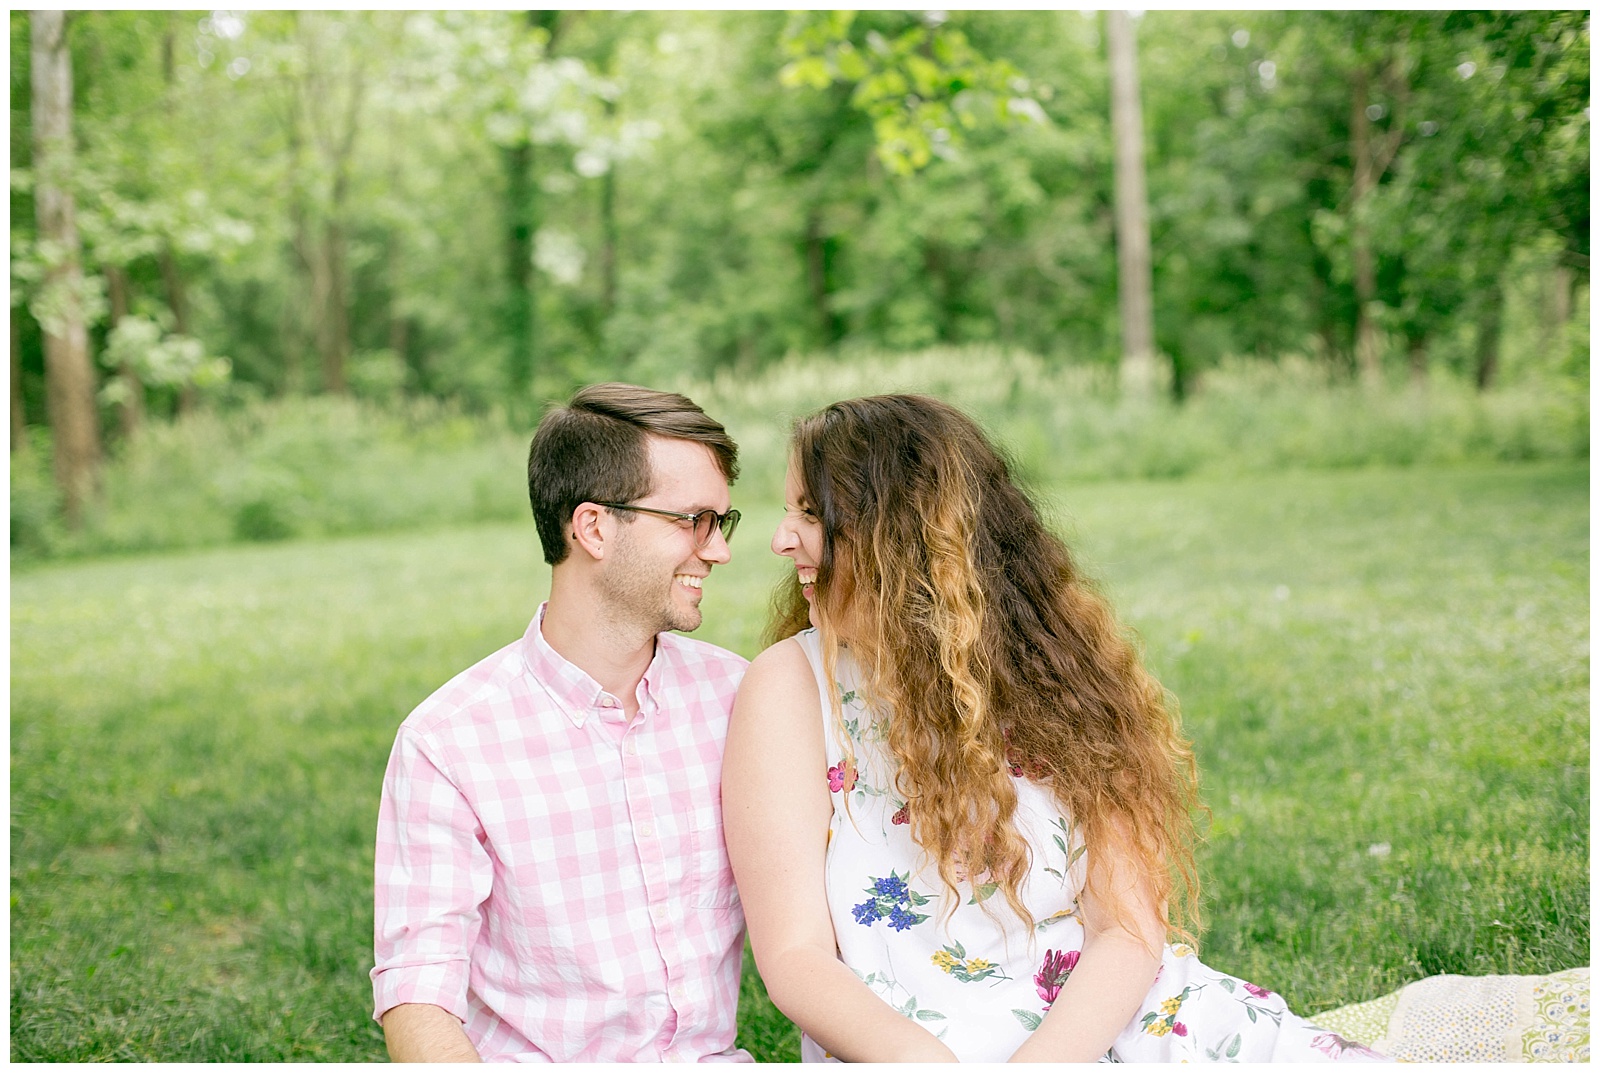 Indianapolis Engagement Session | Monica Brown Photography | monicabrownphoto.com